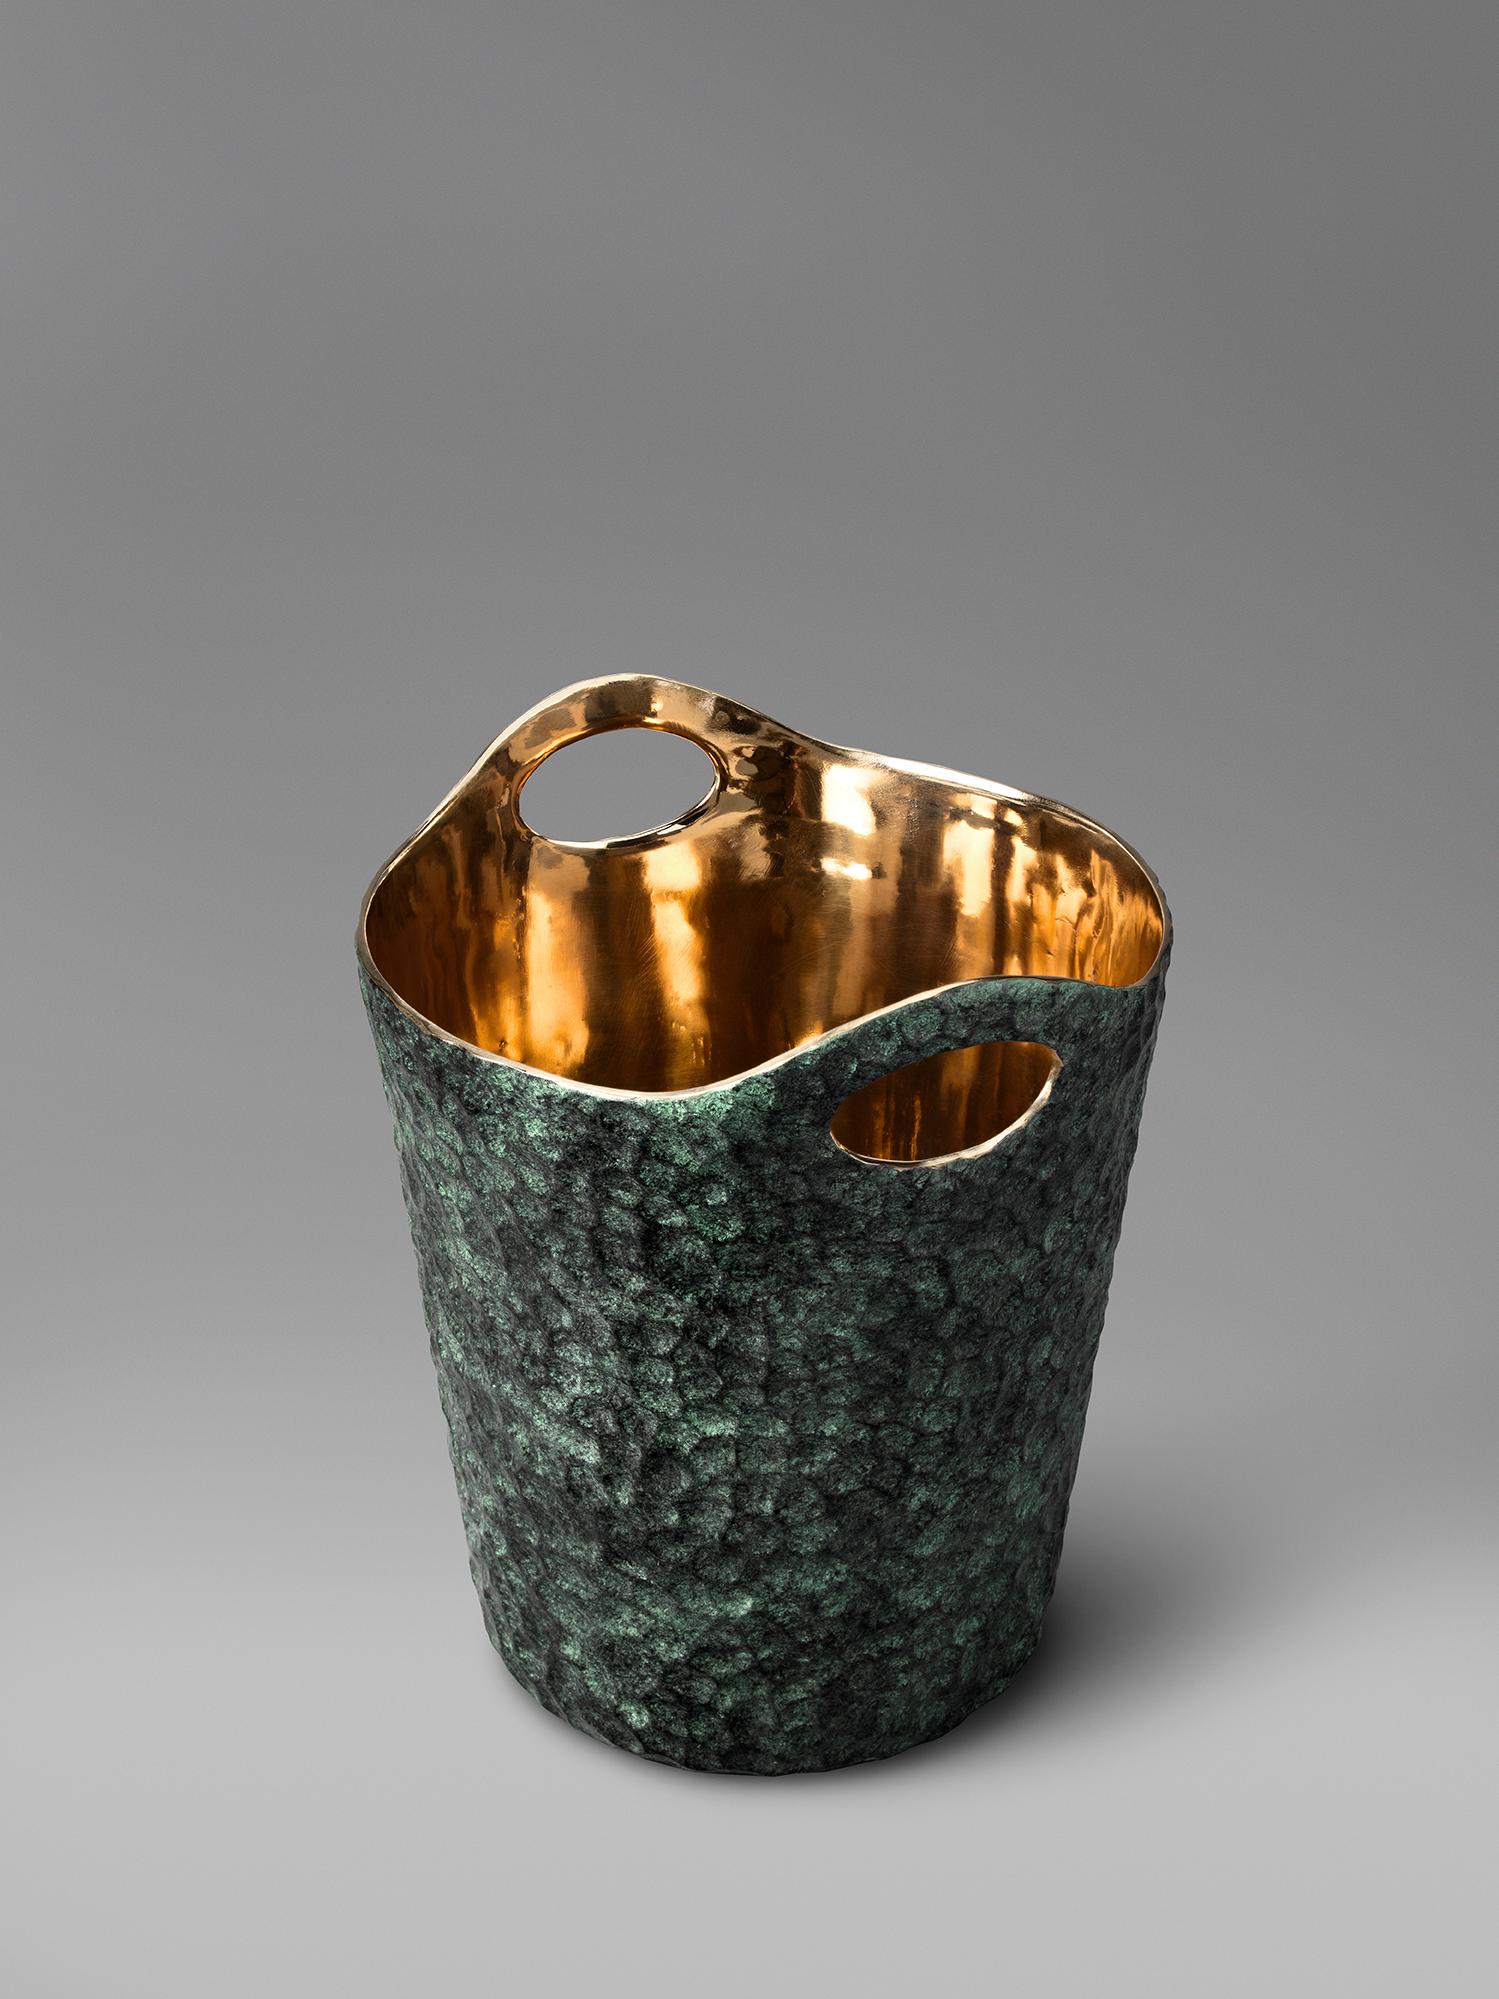 A bronze wine bucket. The smooth wrought surface of the exterior has a beautiful Verdigris patina which contrasts brilliantly to the high shine of the interior wall. It comfortably holds a magnum. We also think it makes for a great cachepot of